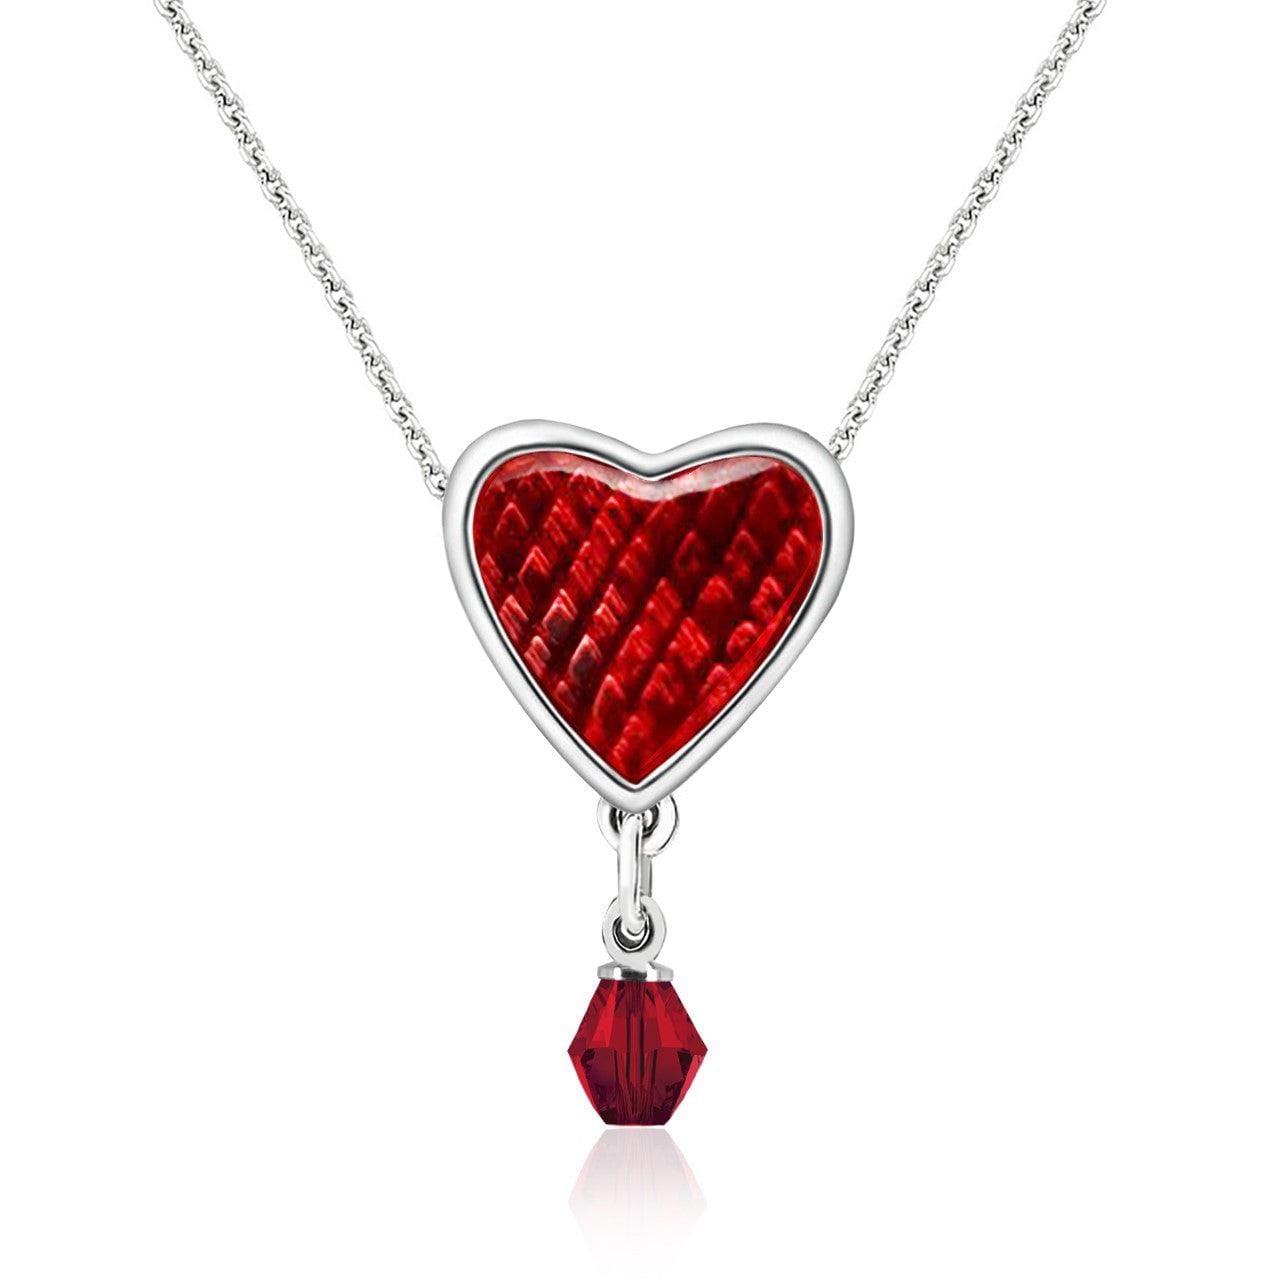 Red Heart necklace with Crystal Drop - J & S Expressions